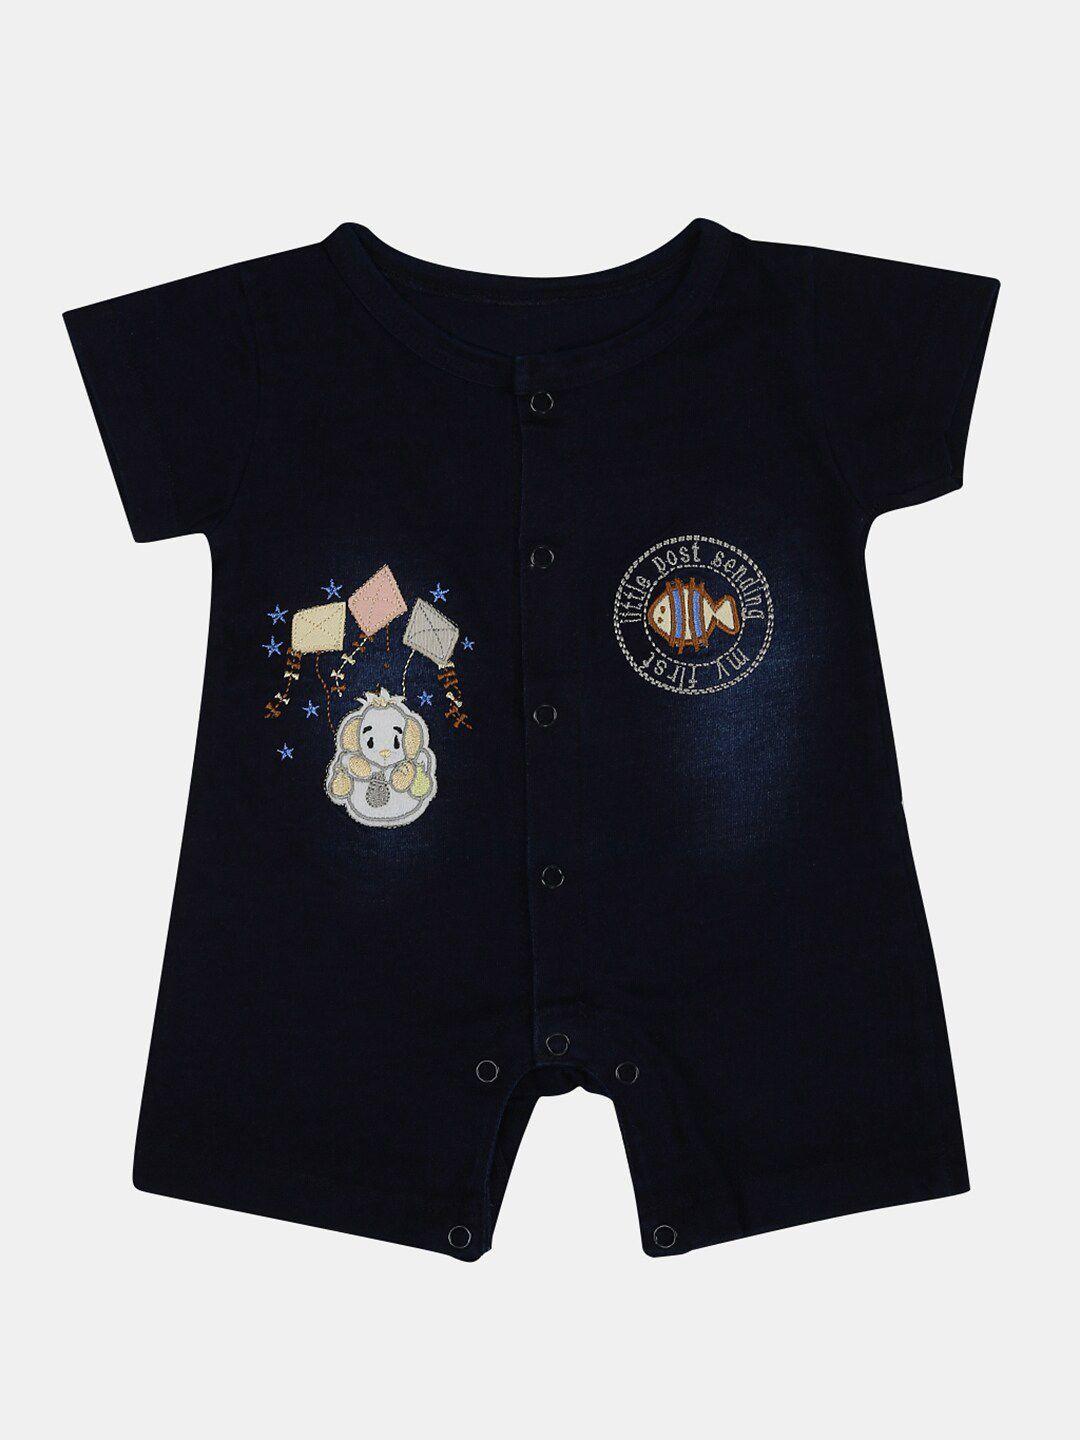 v-mart-infants-graphic-printed-pure-cotton-round-neck-rompers